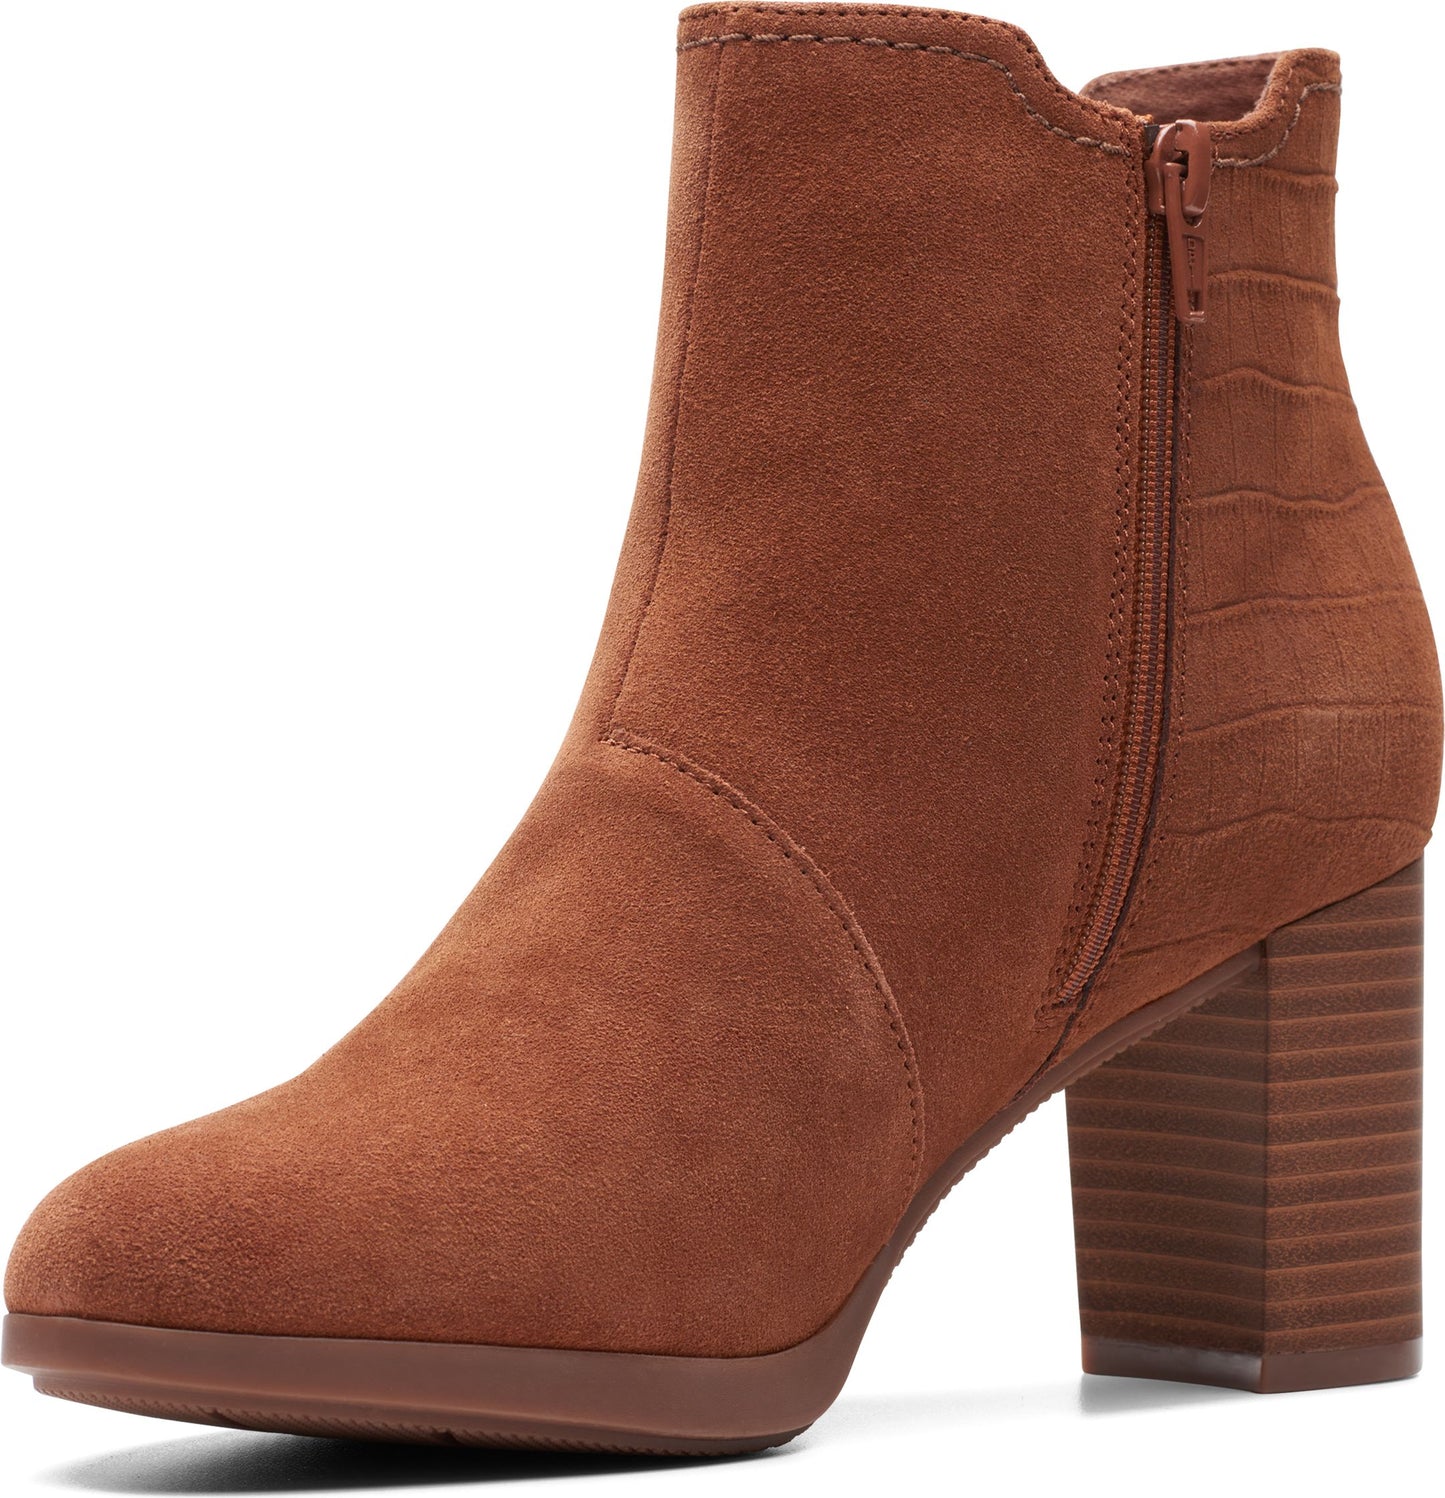 Clarks Boots Bayla Rose Tan Suede